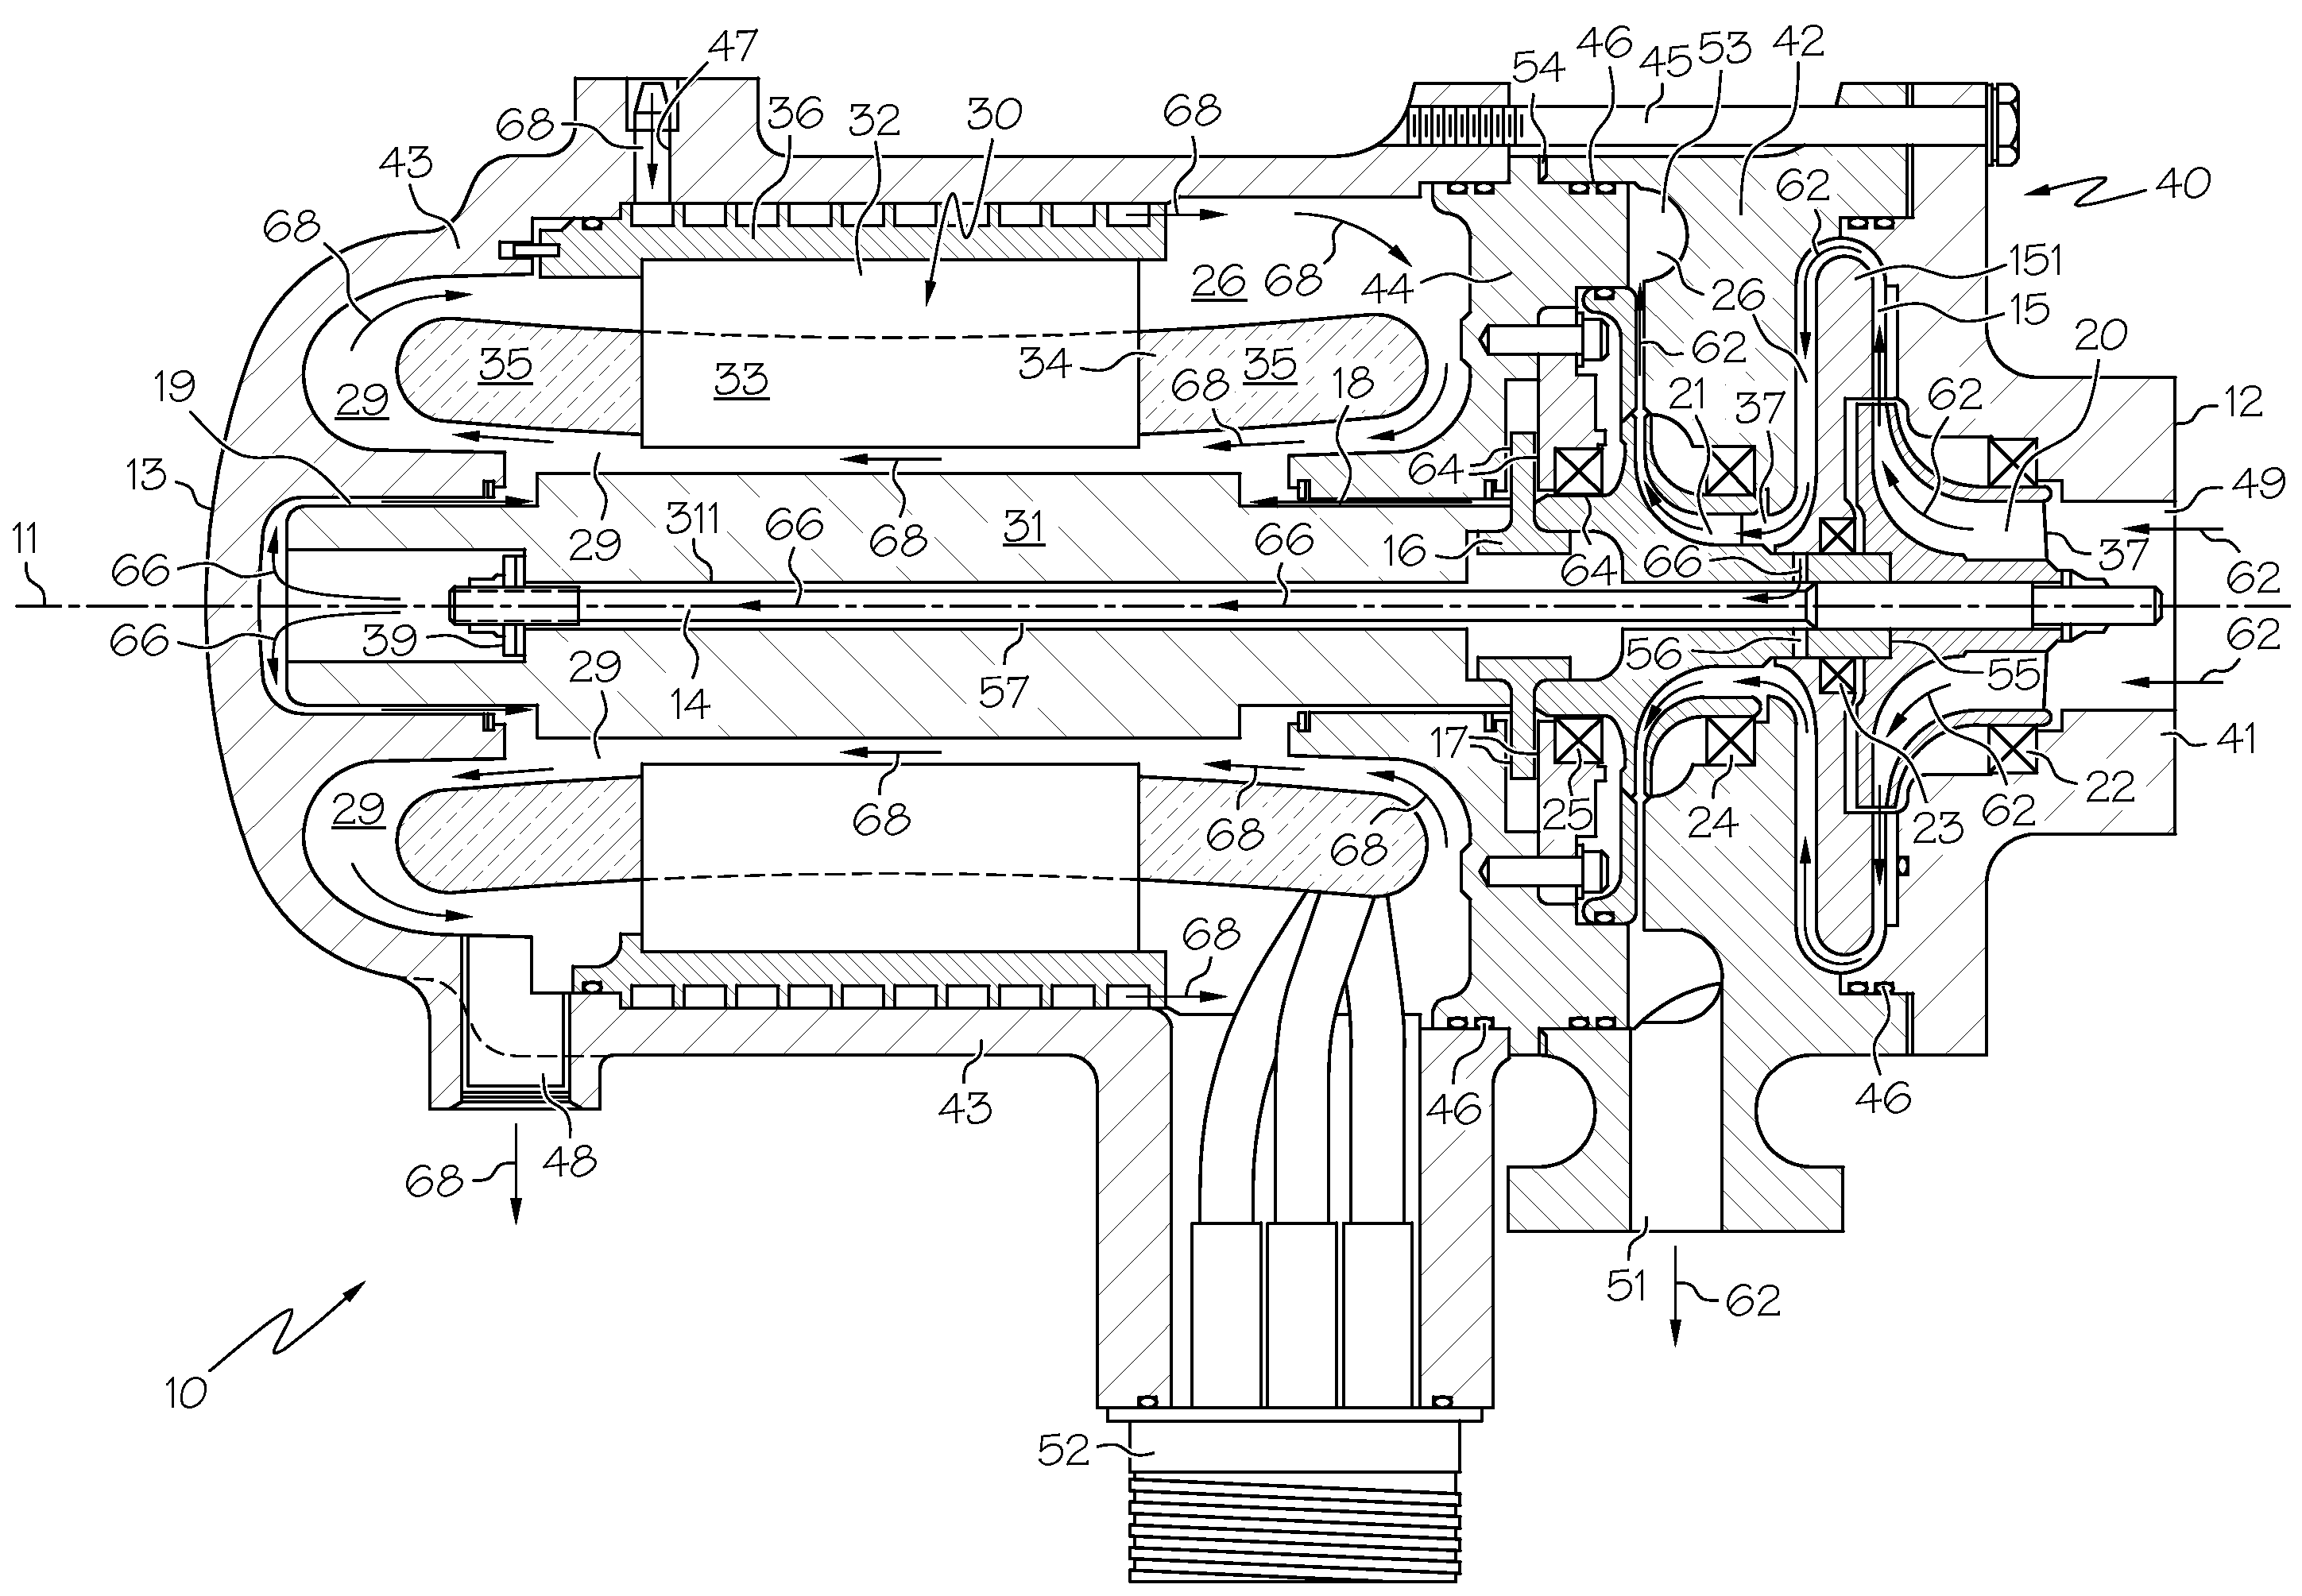 Two-stage vapor cycle compressor